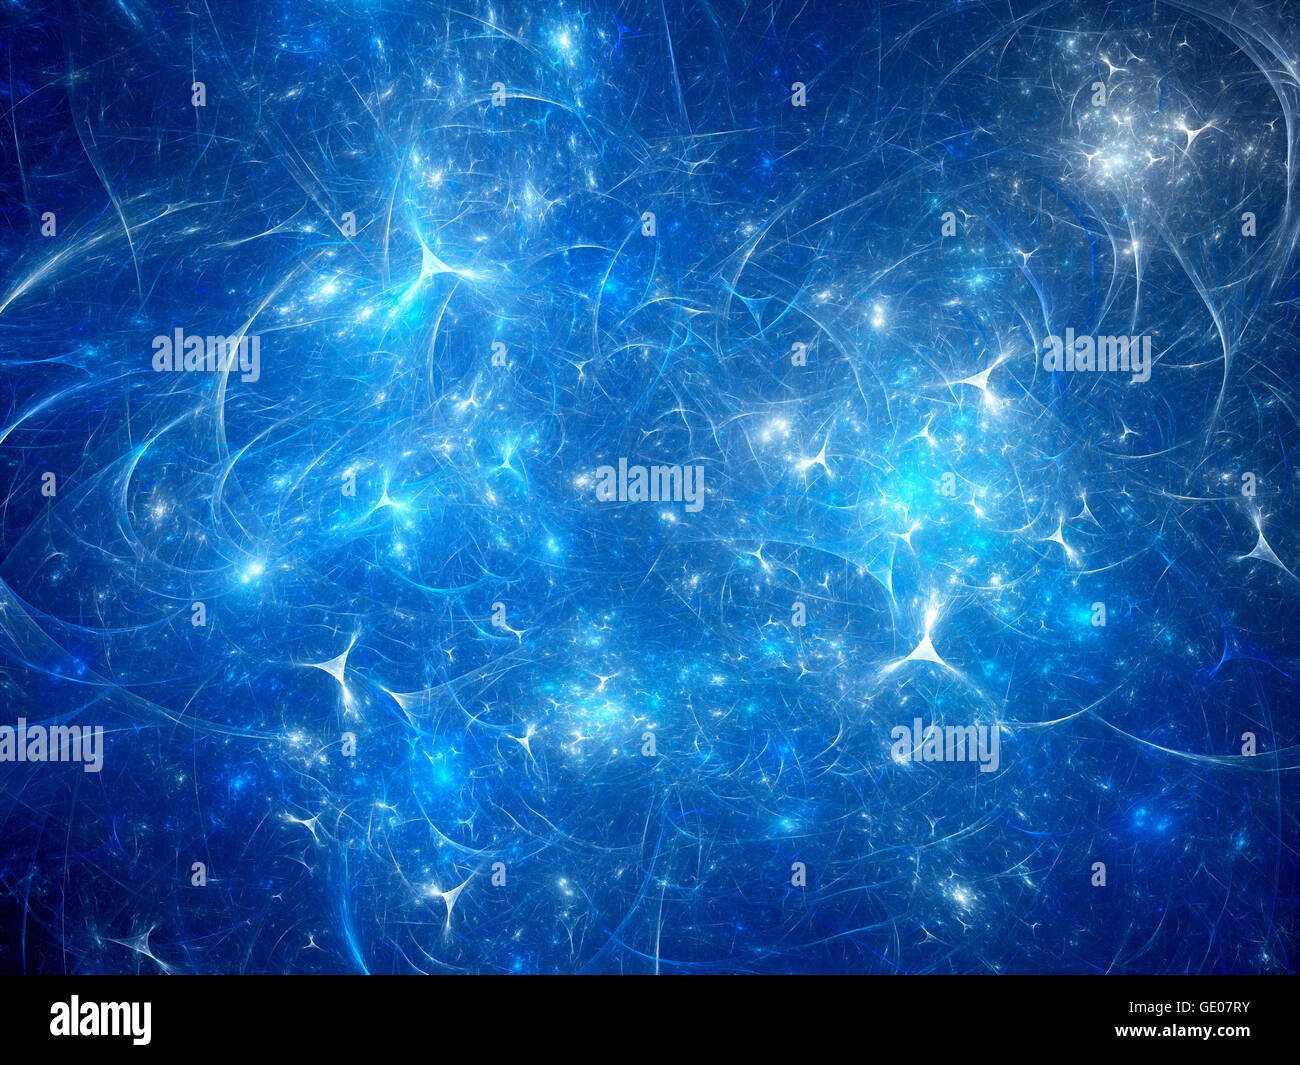 Blue glowing synapses, computer generated abstract background Stock Photo